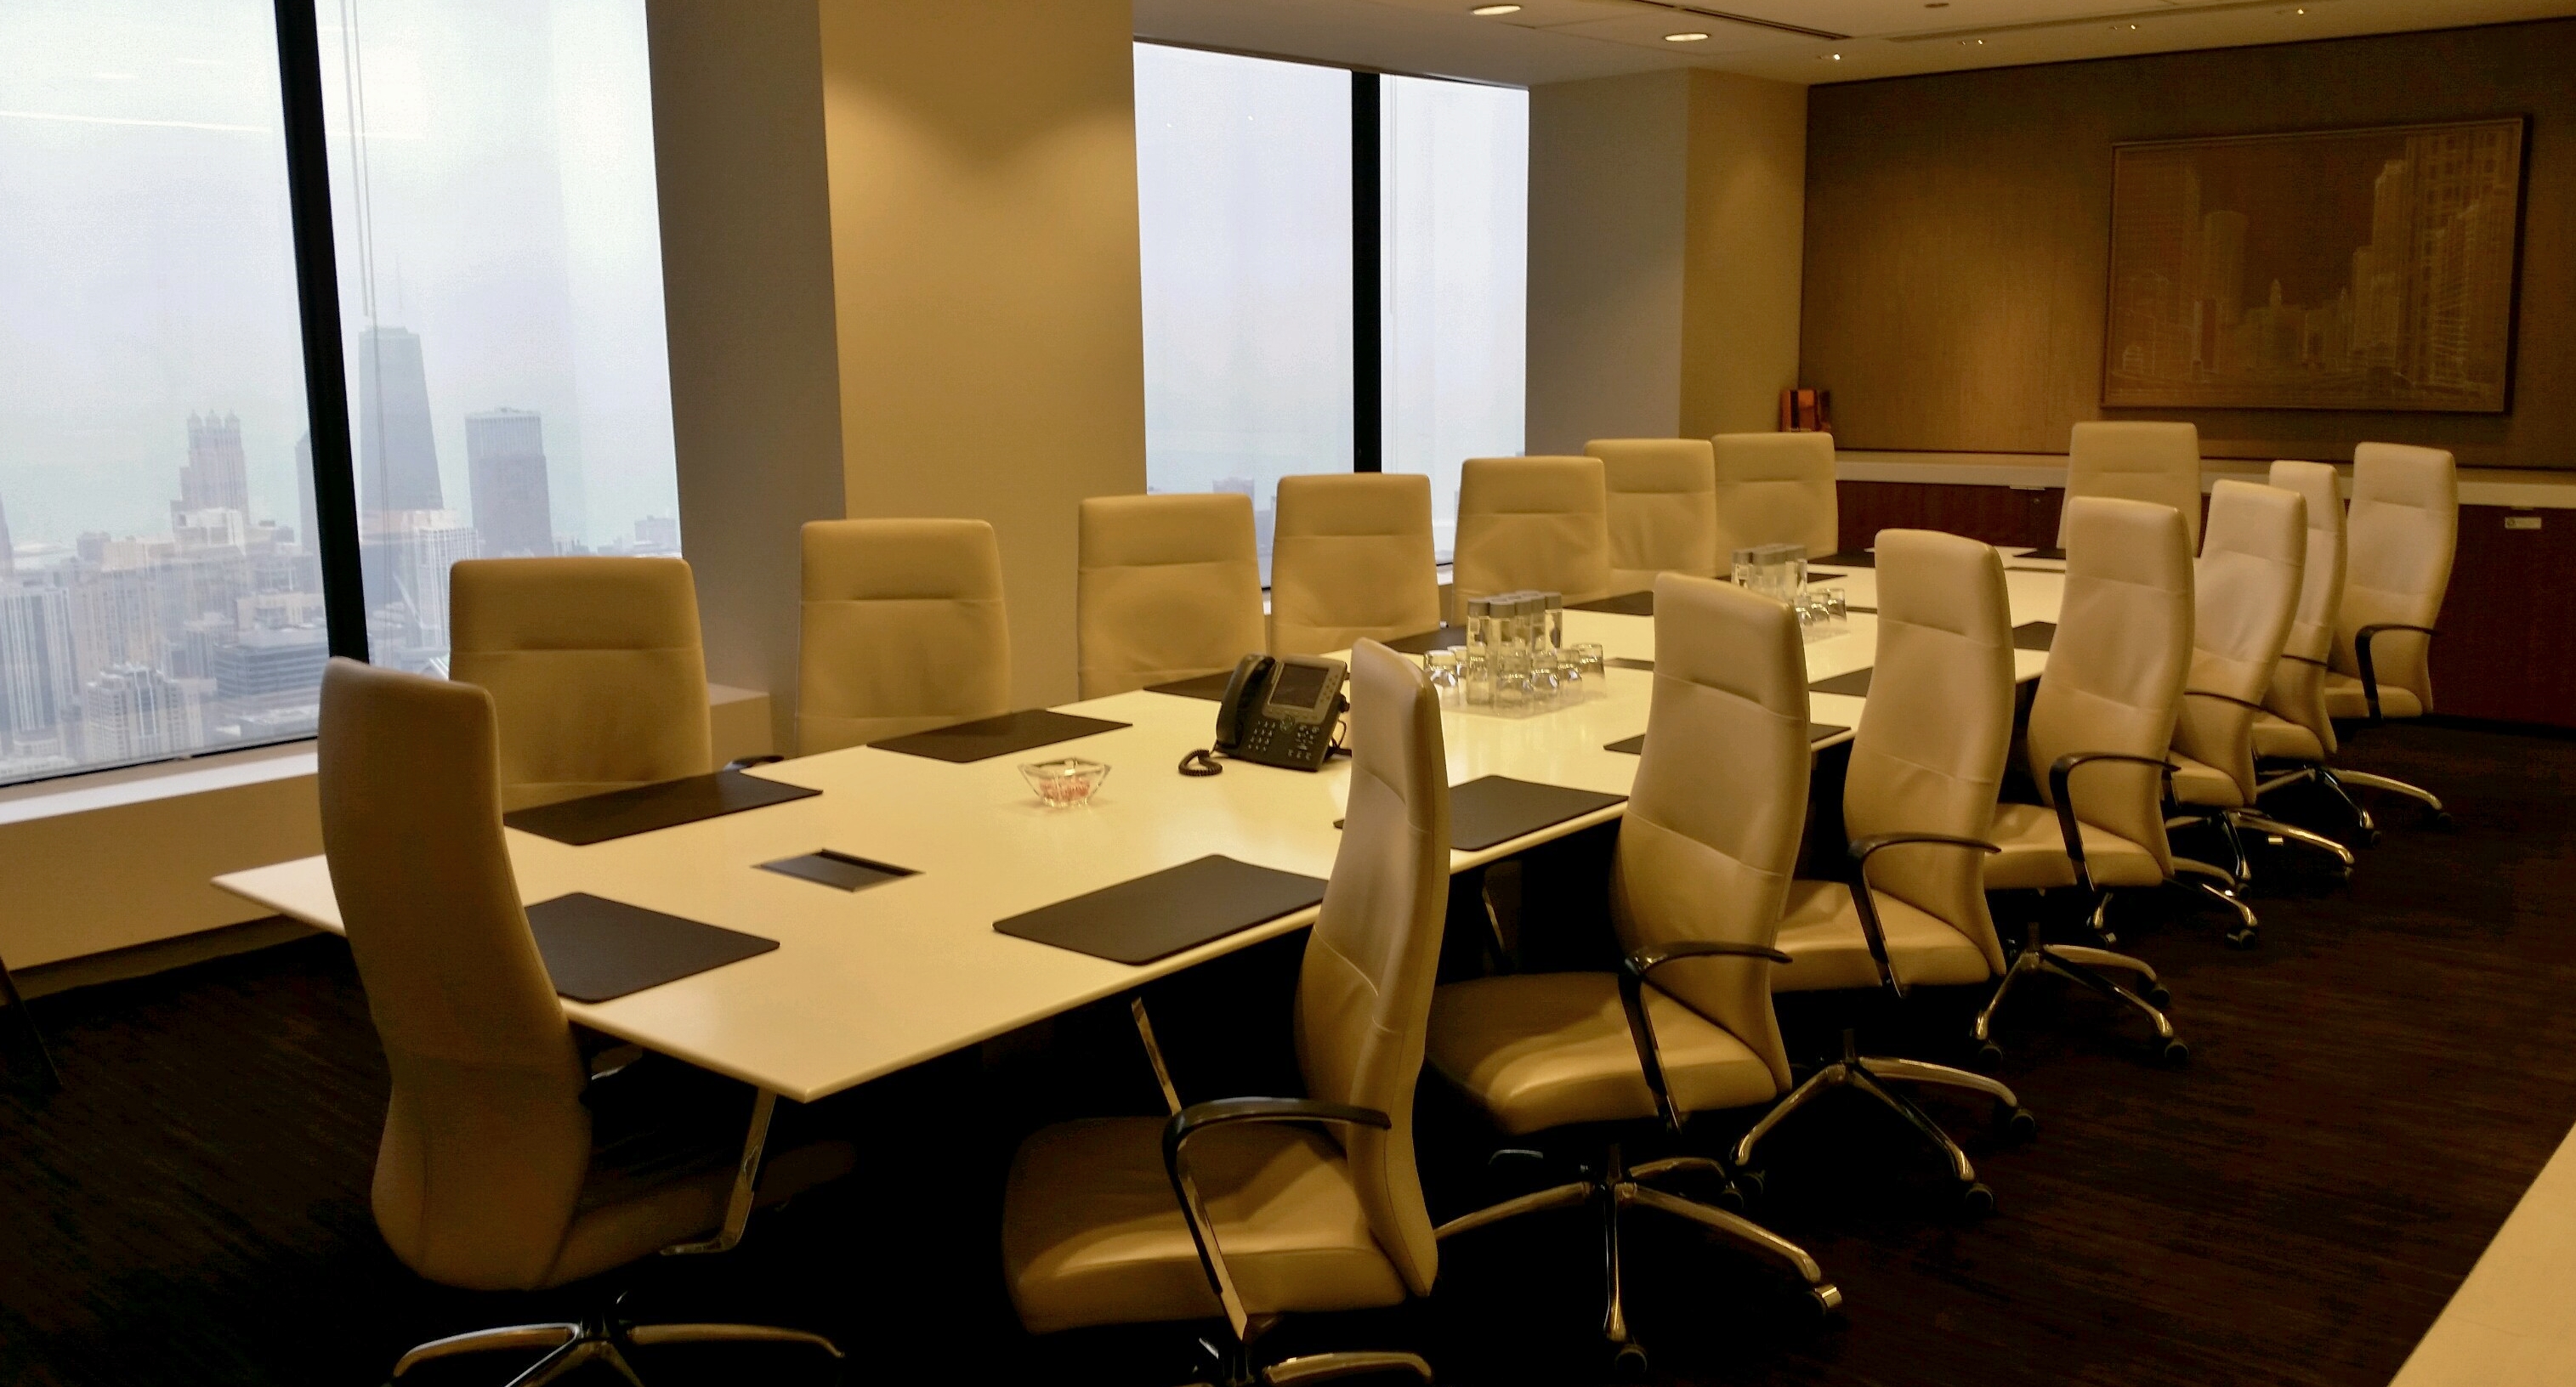 Our meeting room